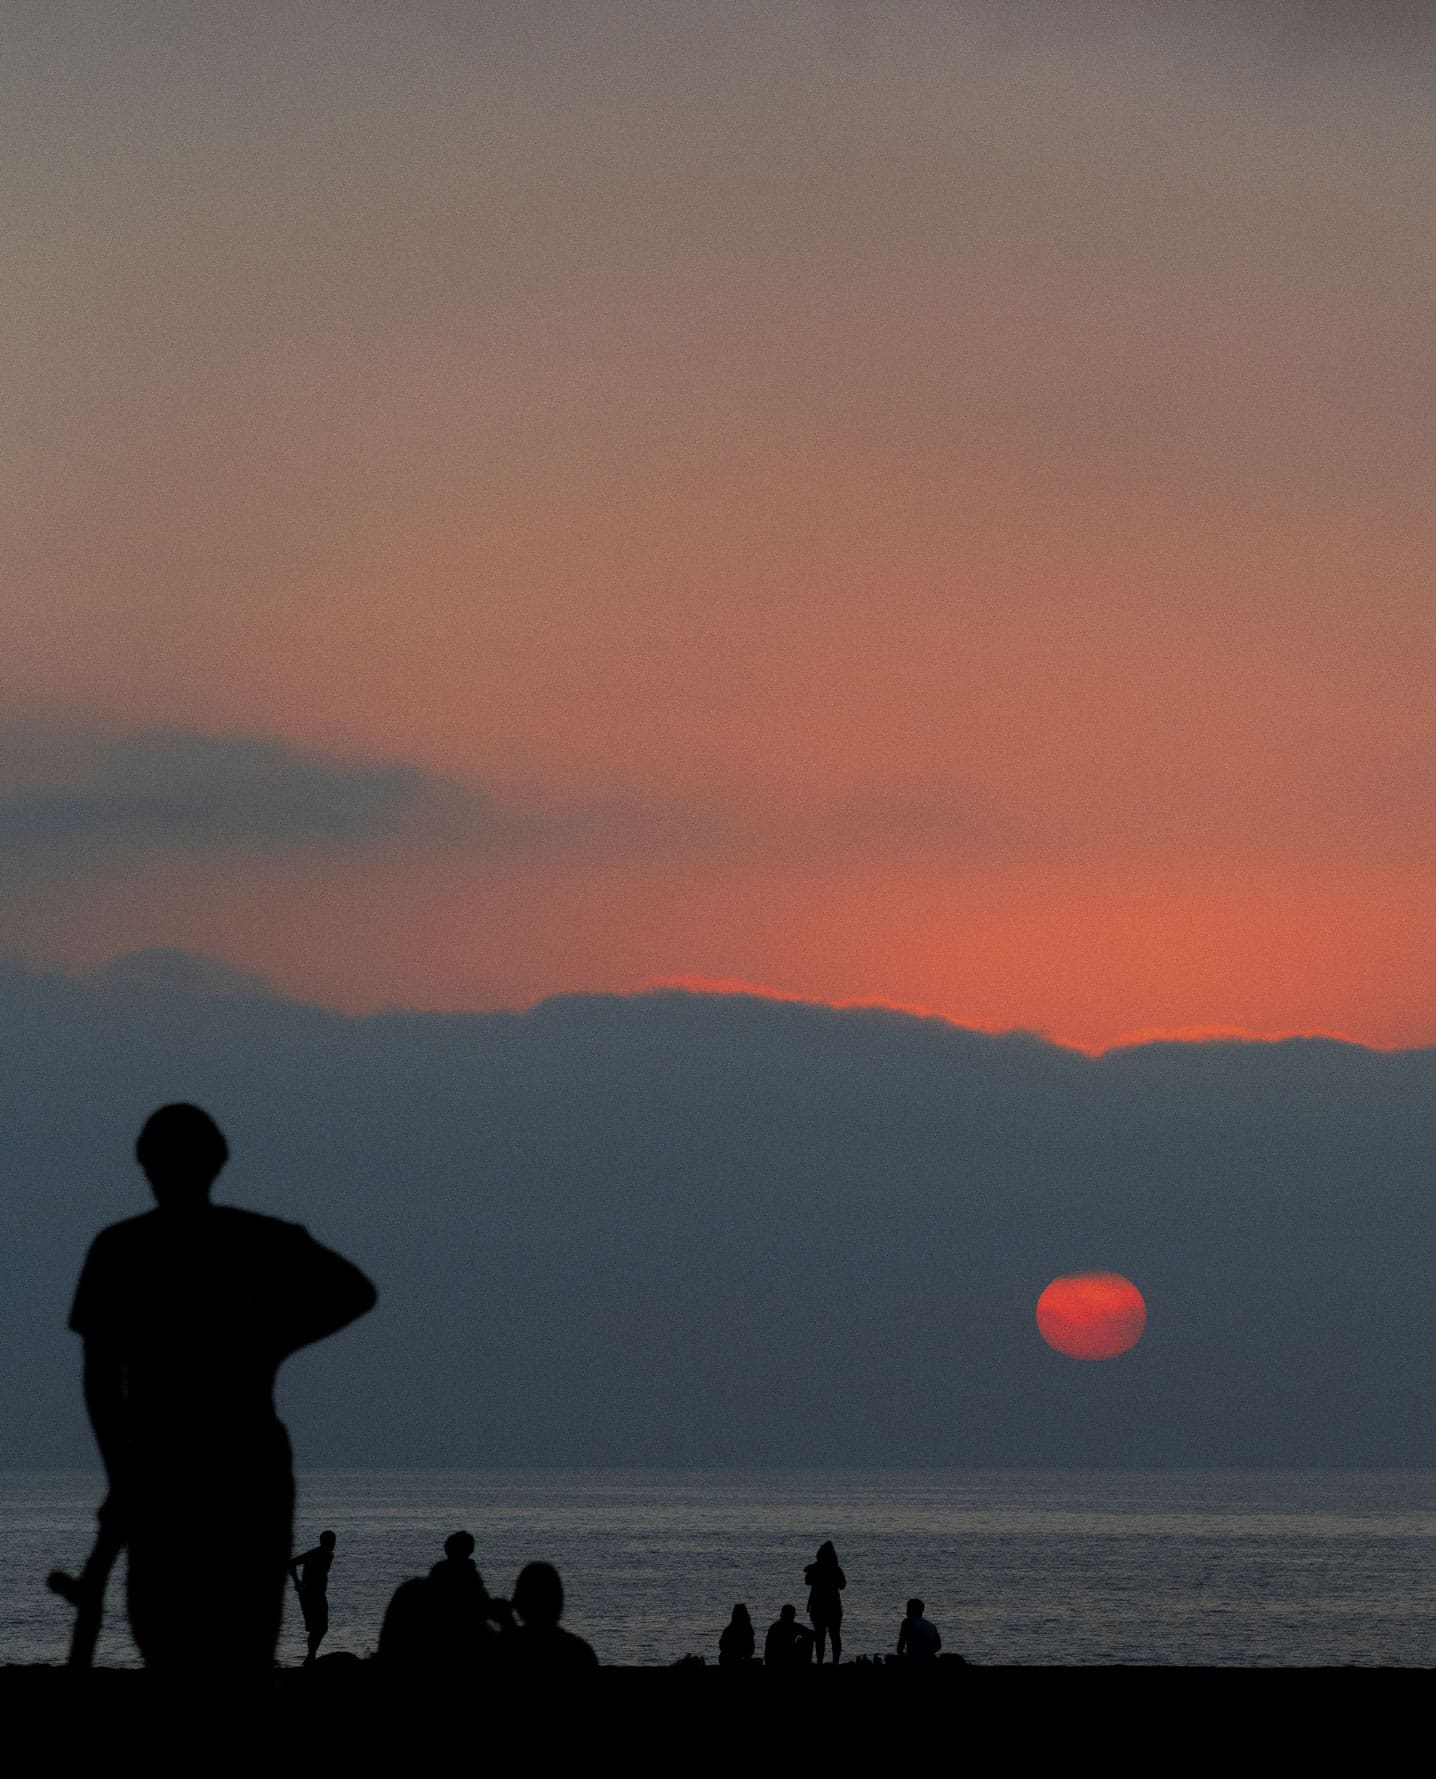 Focal Point, Erik Melvin | Skaters silhouetted against the Pacific Ocean as the red sun dips towards the horizon through a bank of blue grey cloud. Photo by Erik Melvin